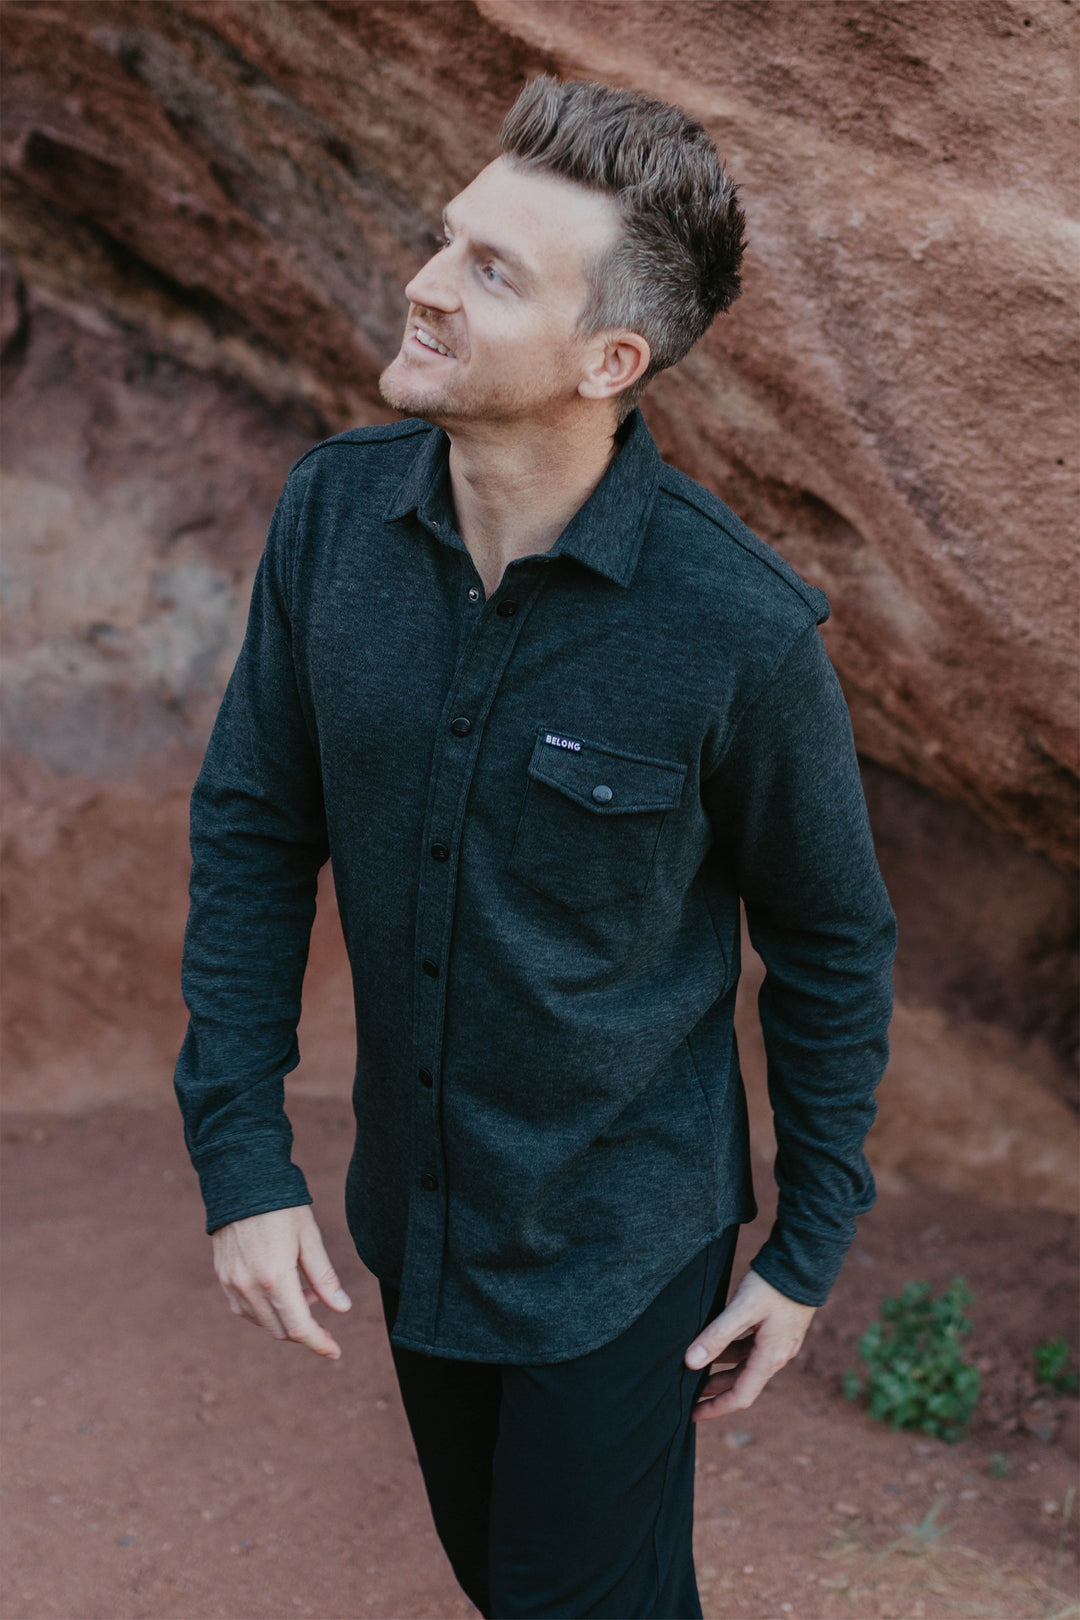 Men's Sherman Fleece Button Up (Discontinued Styles)